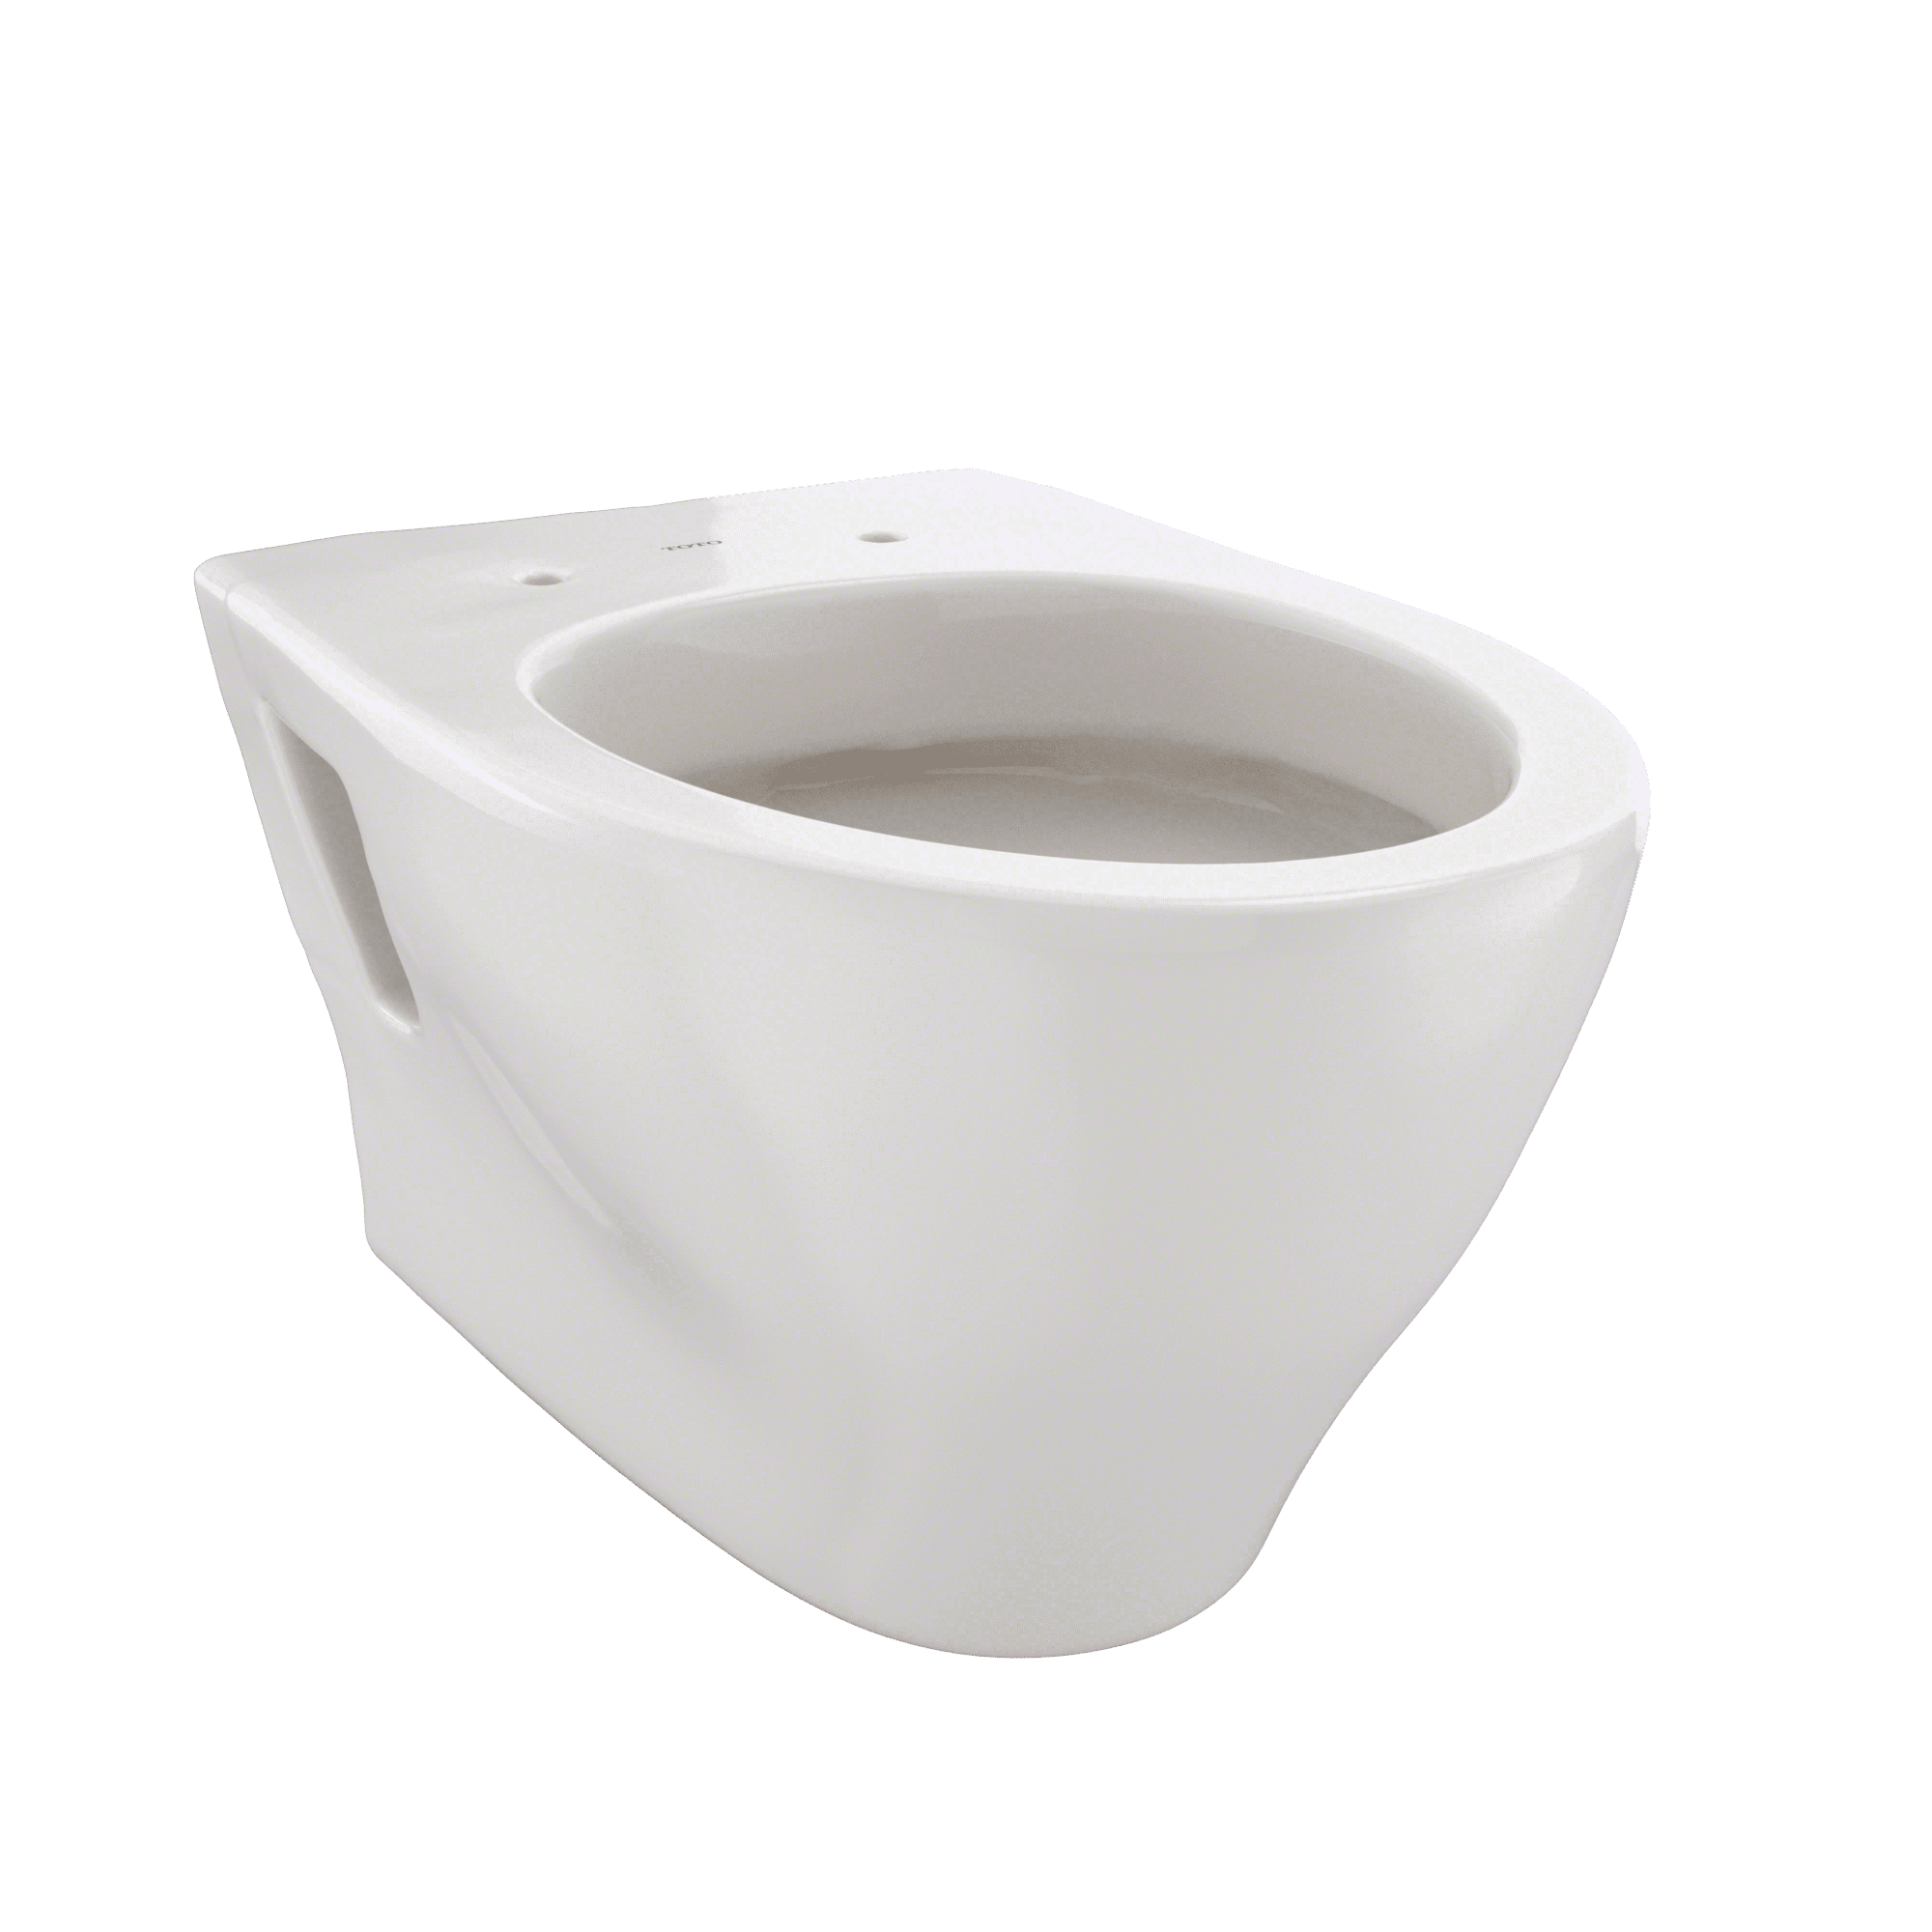 Toto® Aquia® Wall Hung Elongated Toilet Bowl With Skirted Design